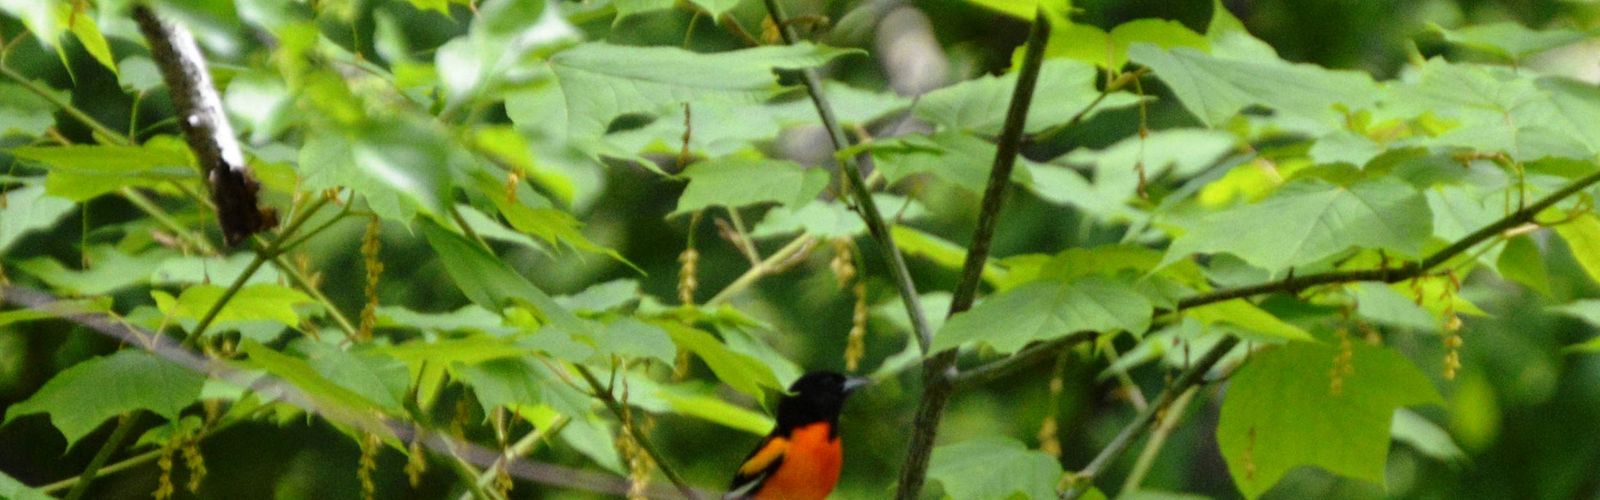 A red and black bird sits perched on the branch of a tree with large green leaves.